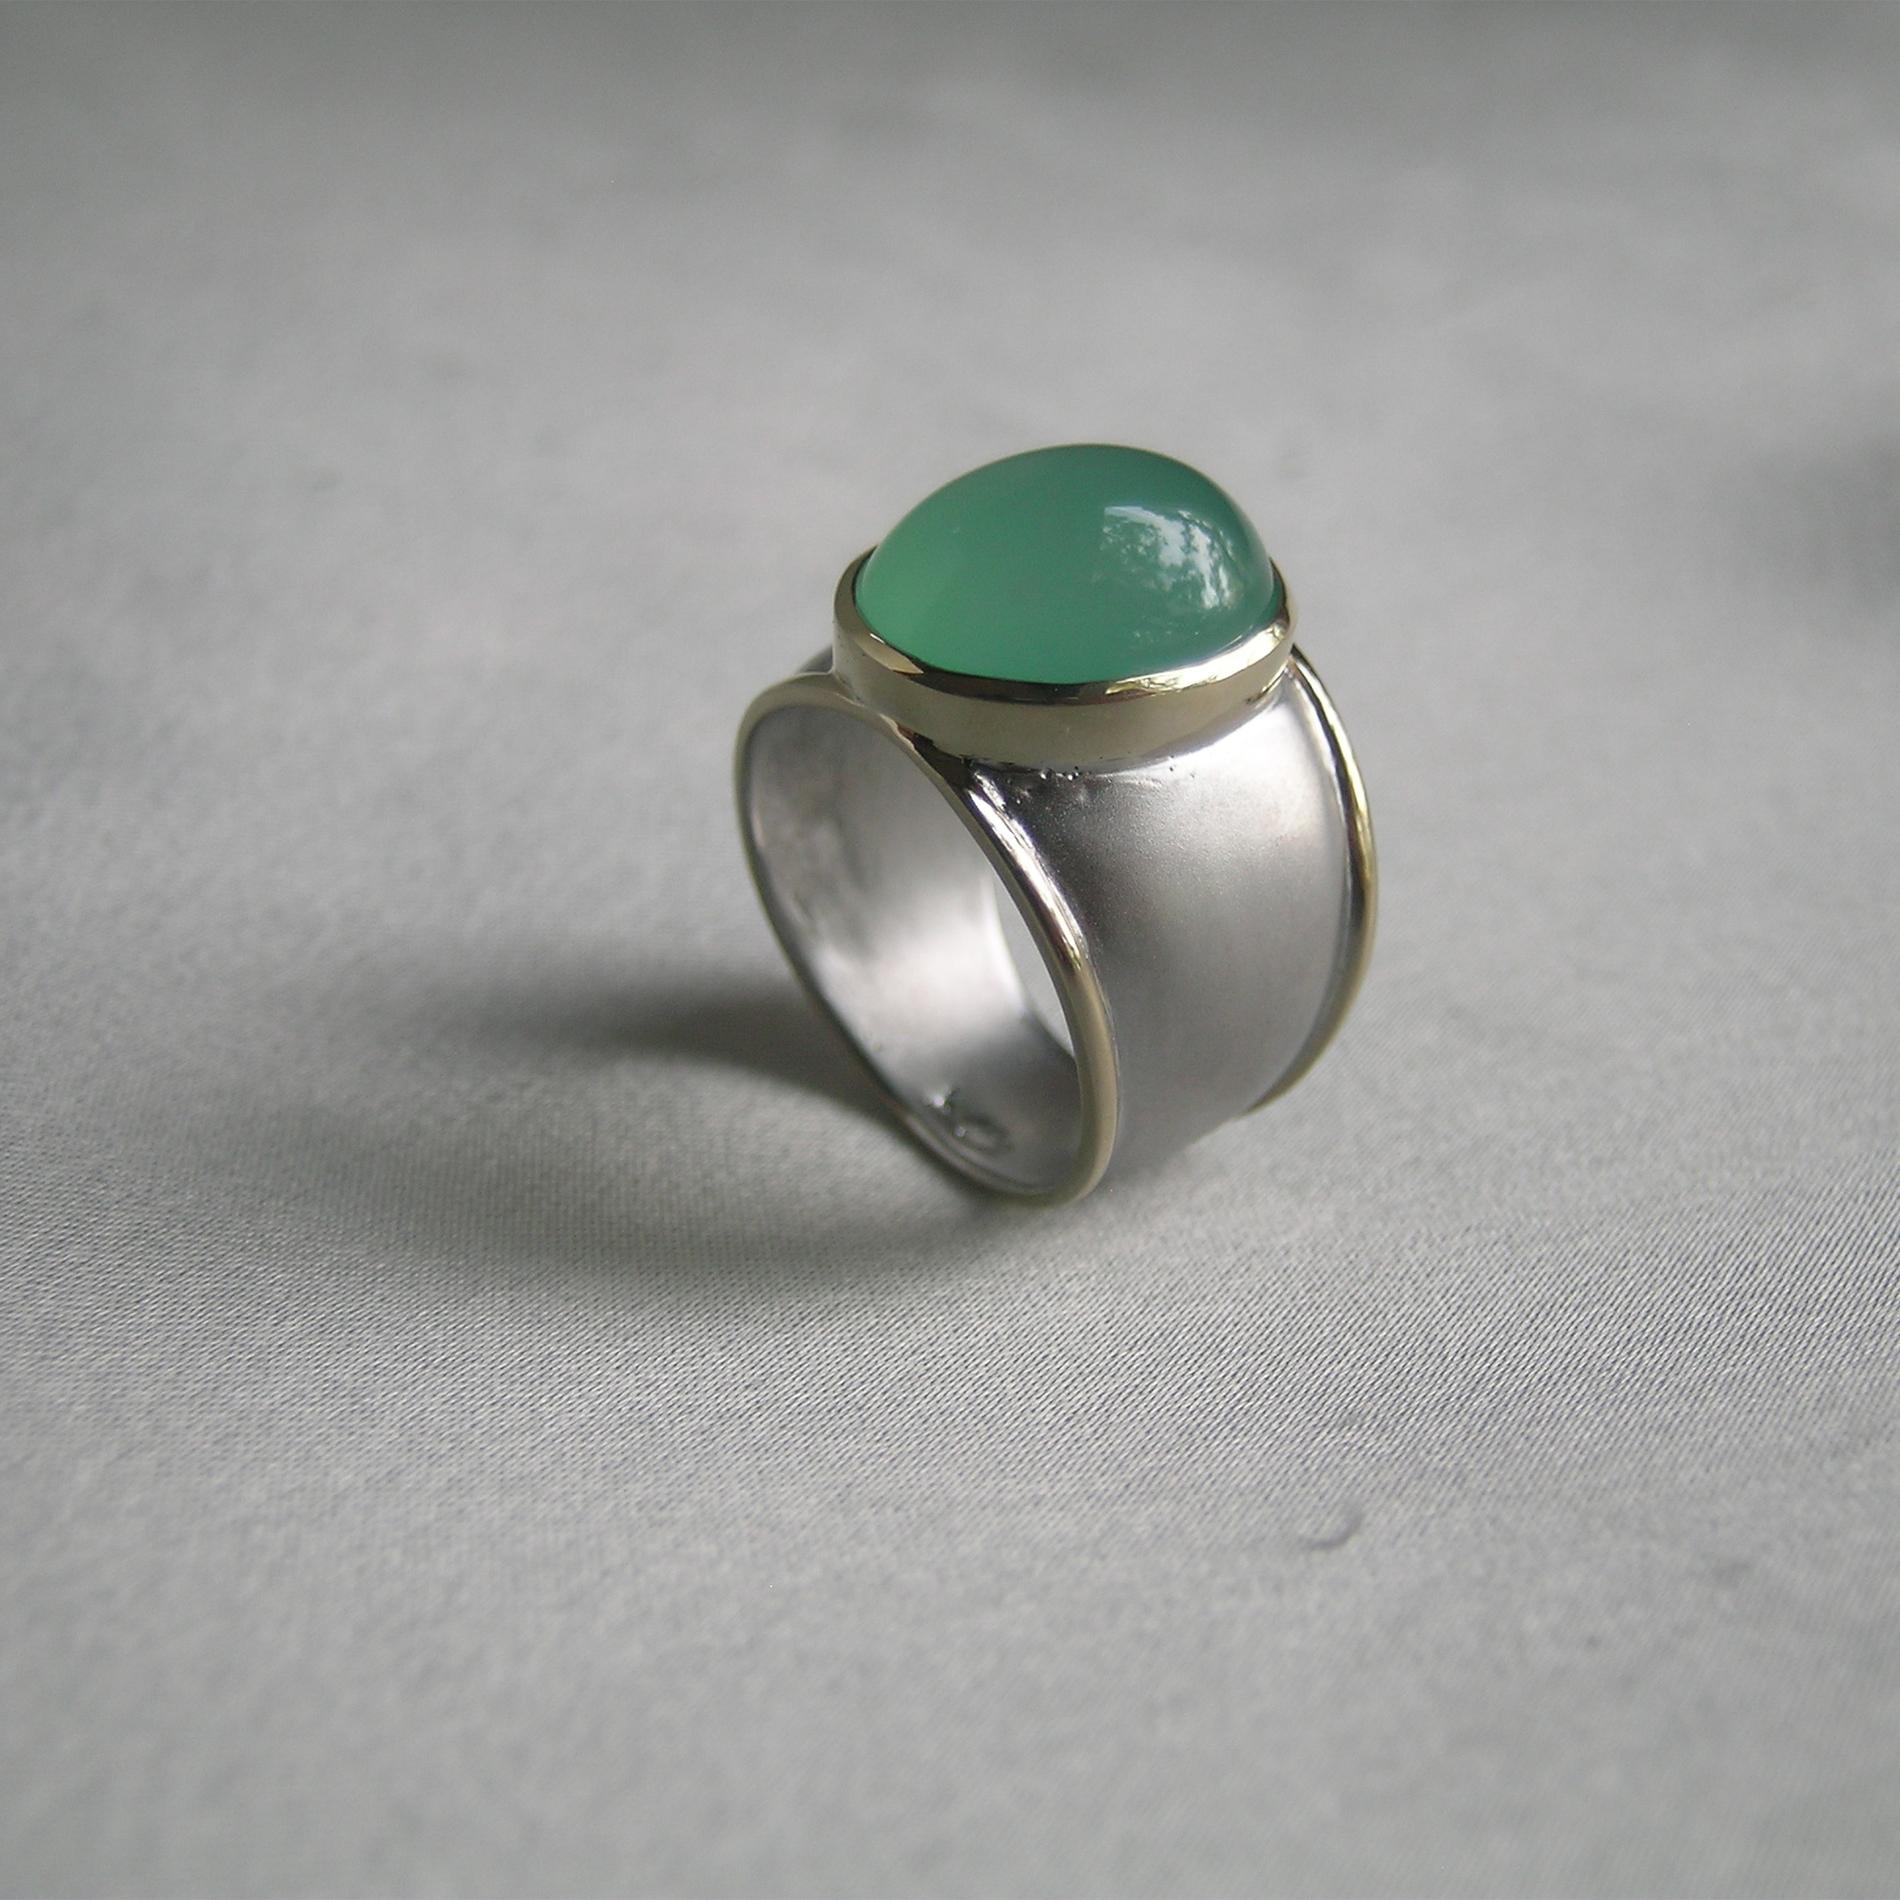 Nancy has  applied her signature satin finish onto Silver, making a fresh, unique and fun look meant to be worn every day.  The ring looks expensive, but is not!  The 9 carat Cabochon Chrysophrase is the color of the Caribbean Sea and anyone who